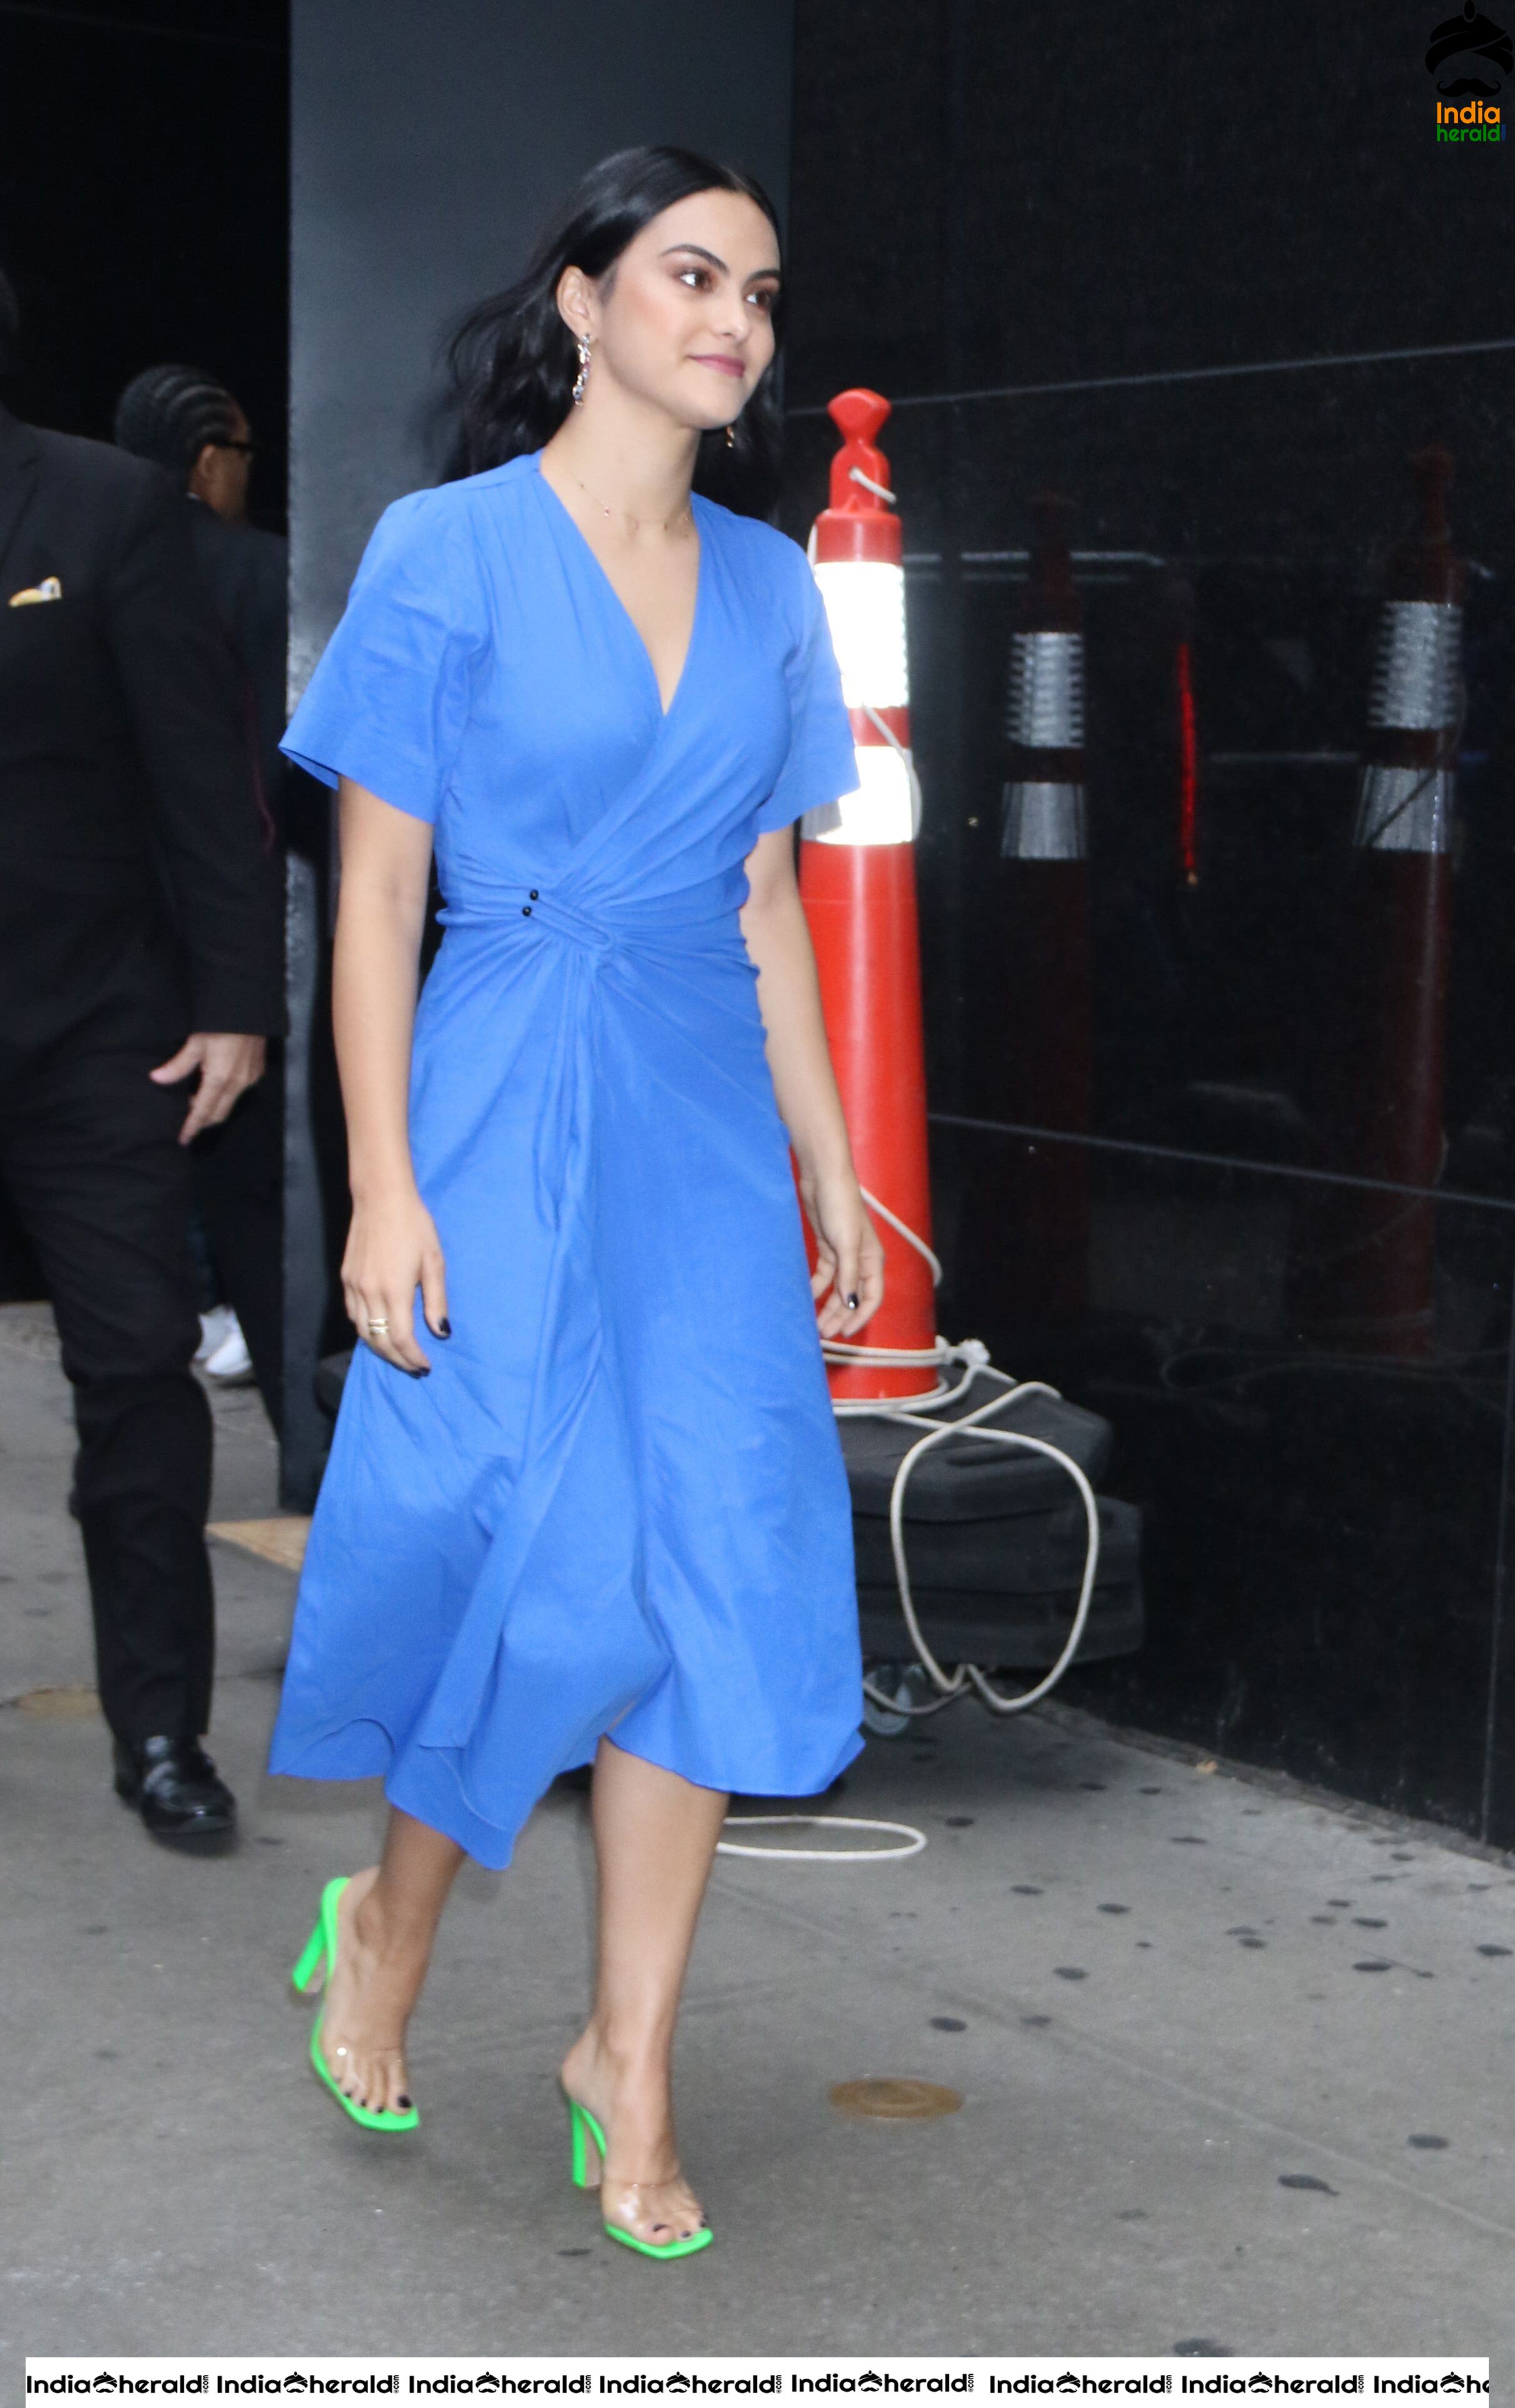 Camila Mendes On The Way to Good Morning America Show in NYC Set 2